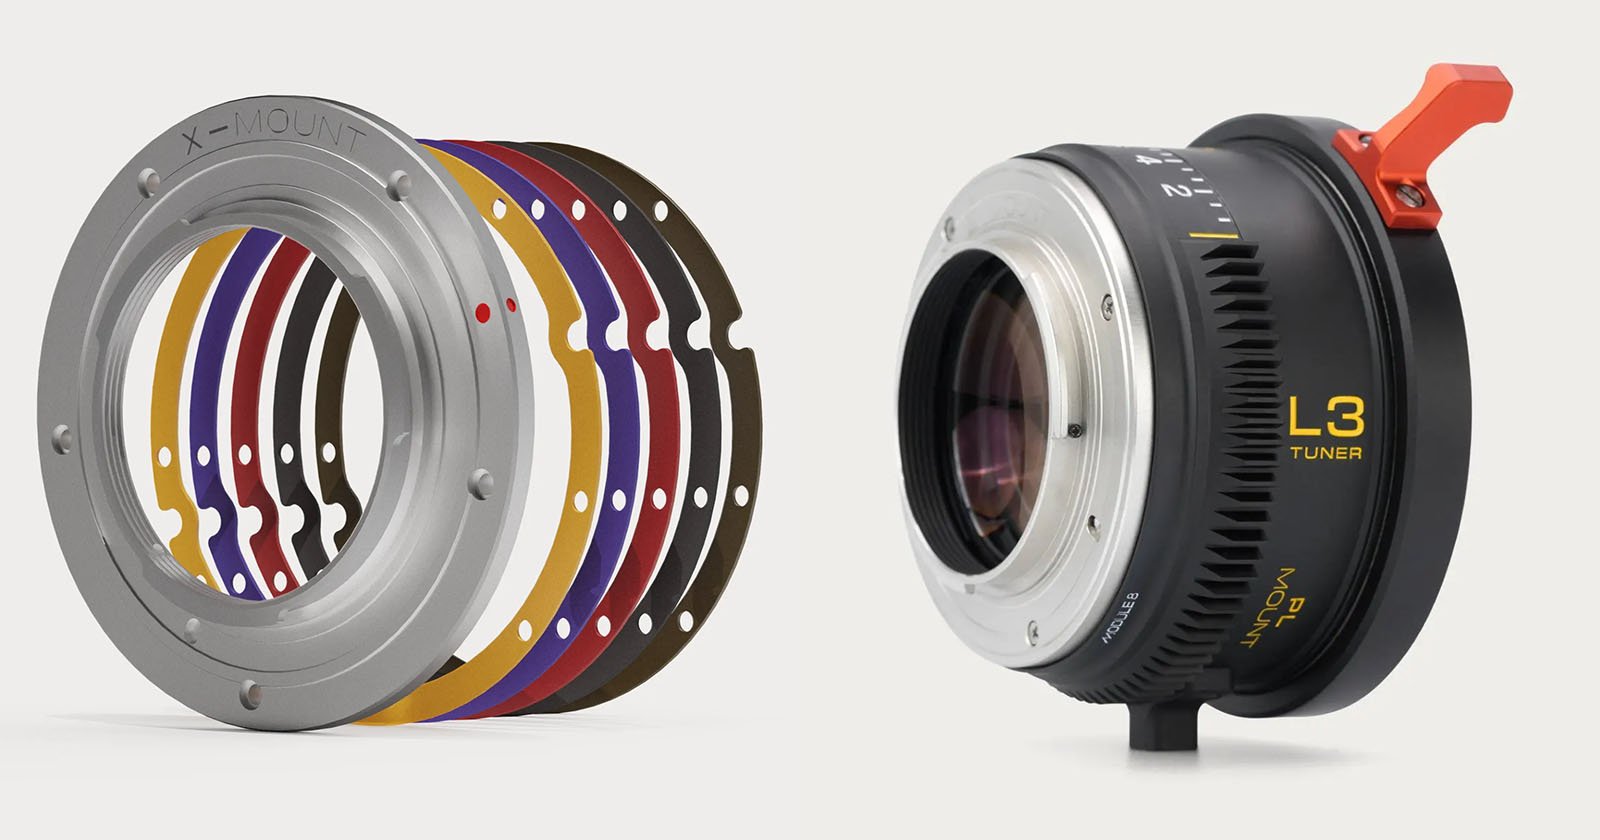 Module 8s Clever Vintage-Inspired Lens Tuner Coming to X and L-Mount